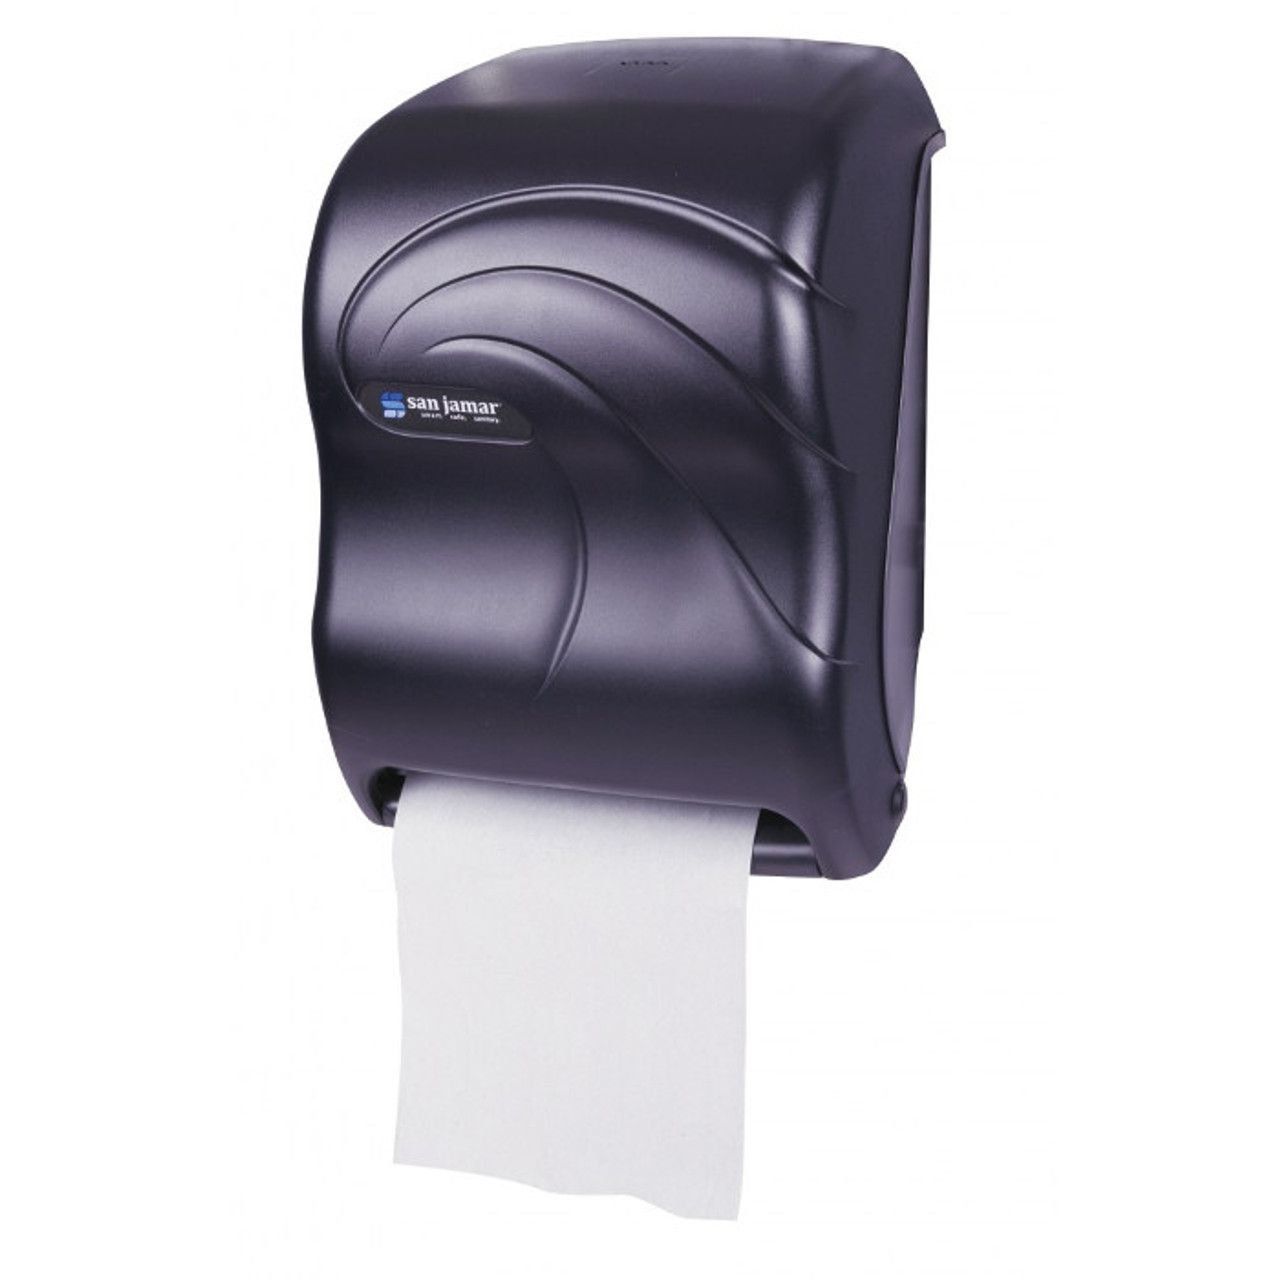 The Tear N Dry touchless paper towel dispenser offers improved hygiene over traditional dispenser.